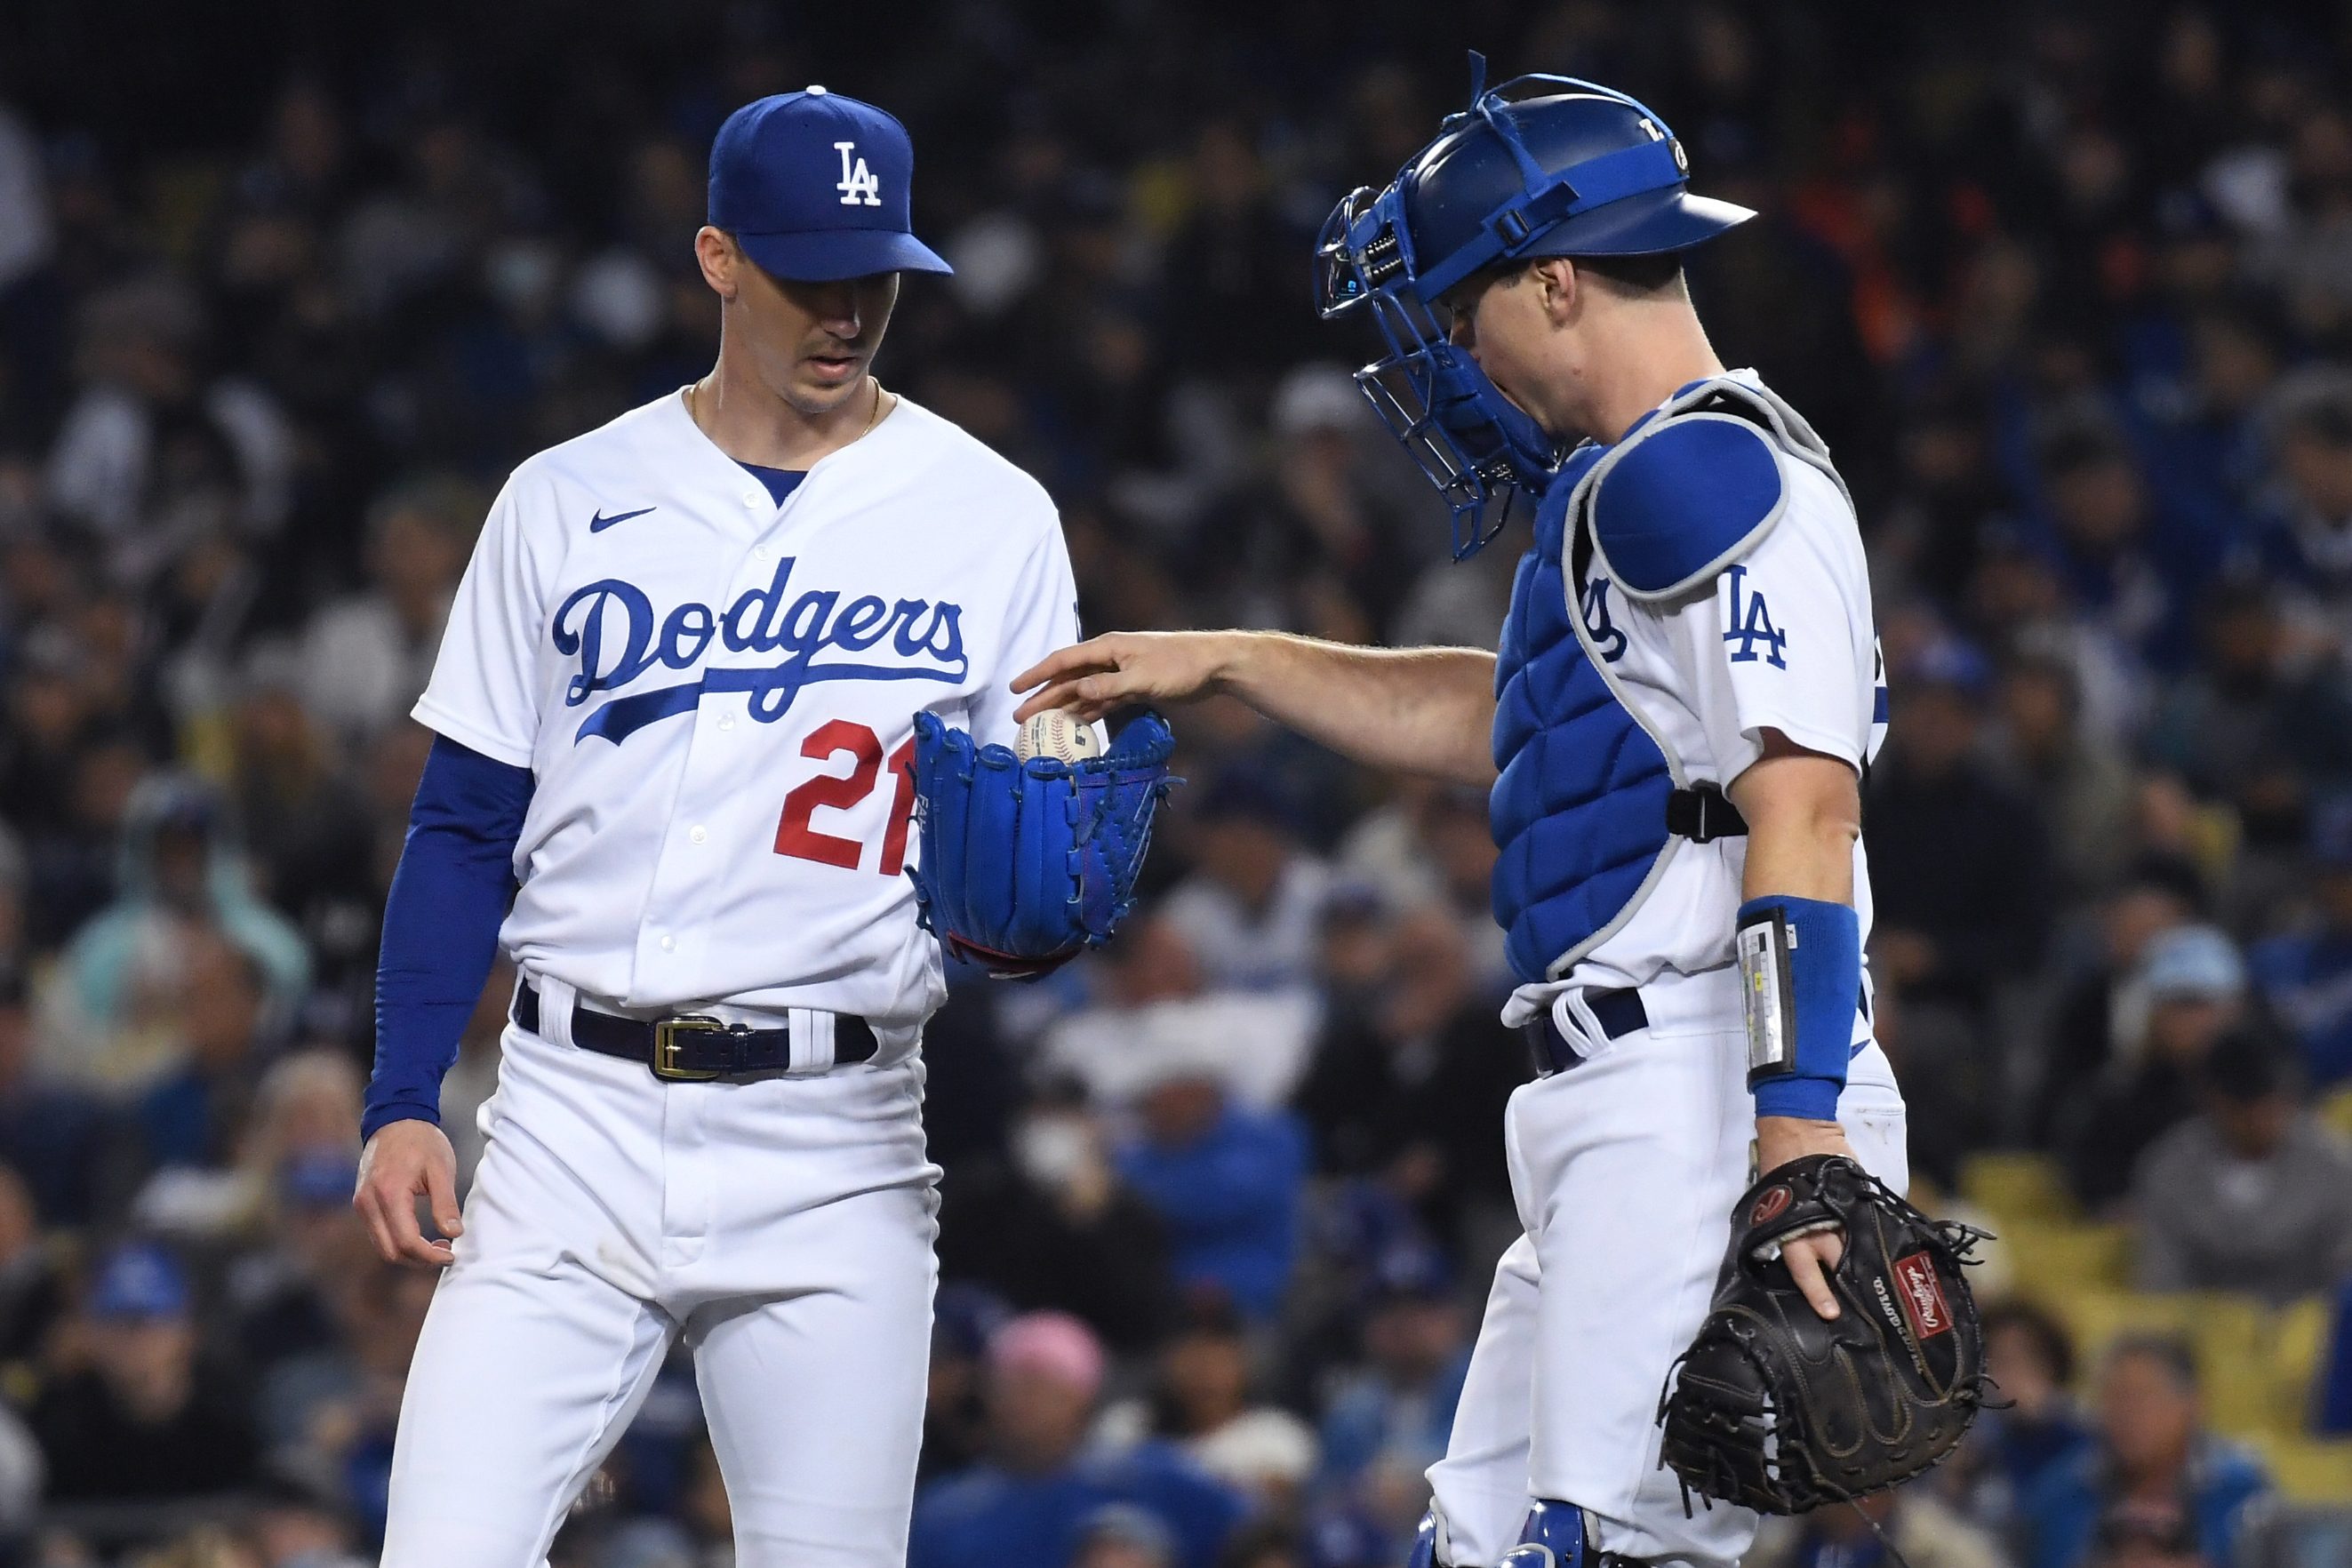 Dodgers’ Walker Buehler Starting for Rancho Cucamonga on Friday